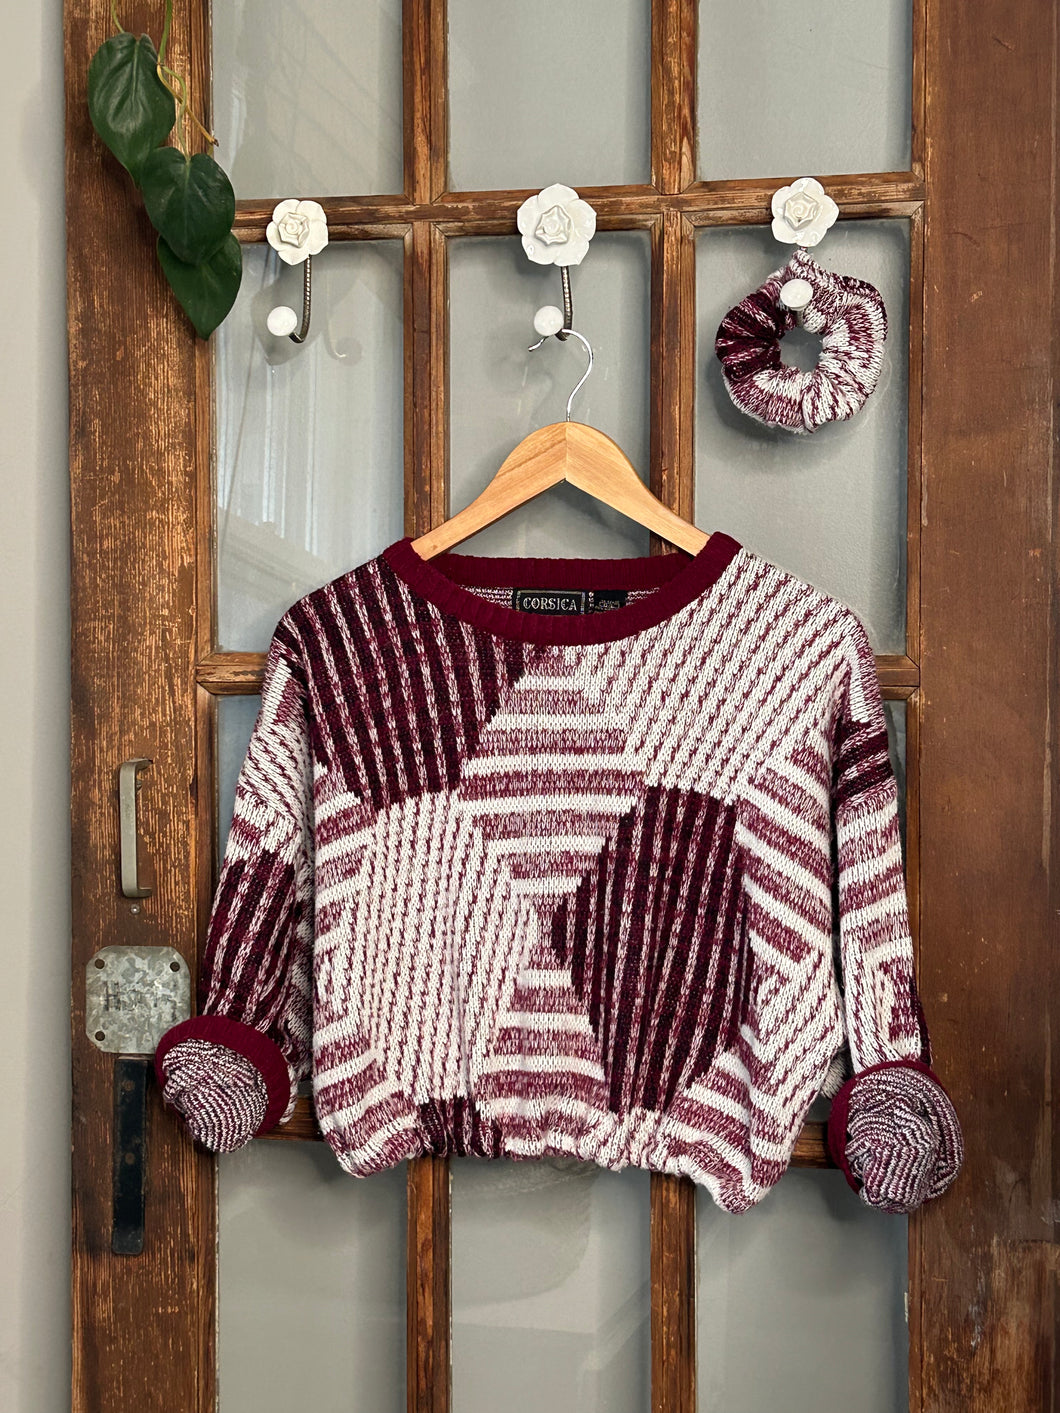 the vintage abstract knit set